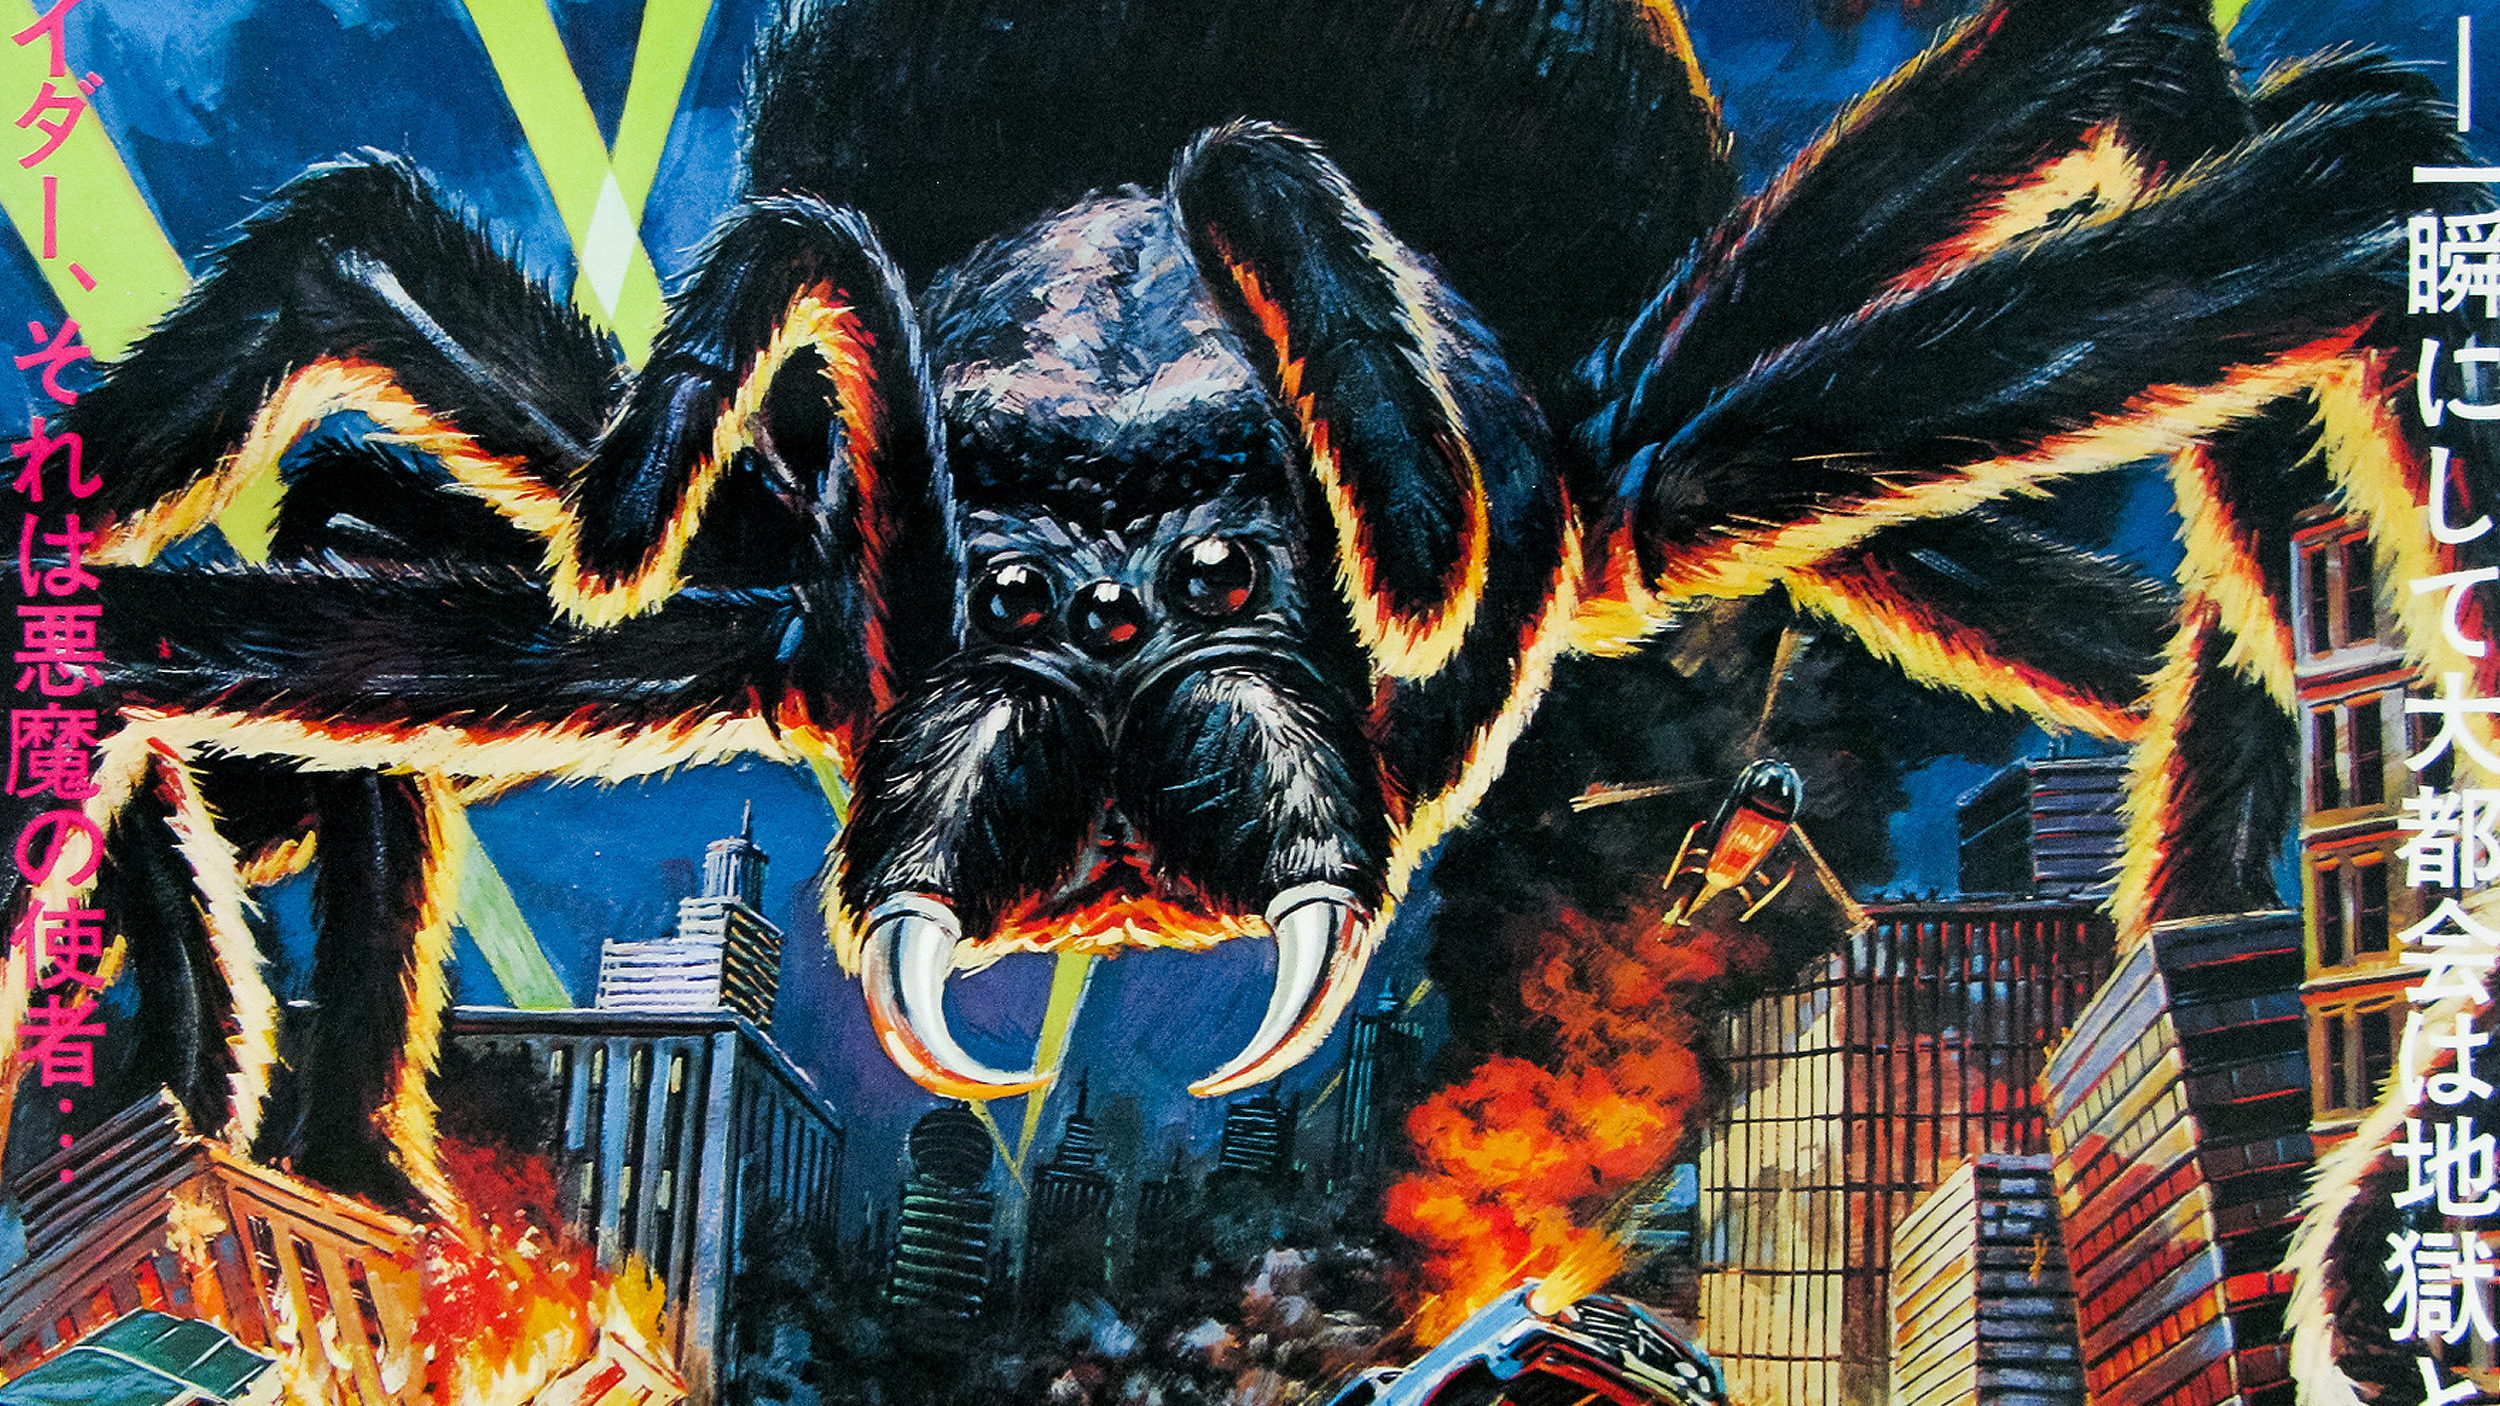 Artwork of a giant spider attacking a city, with buildings in flames and text in japanese.